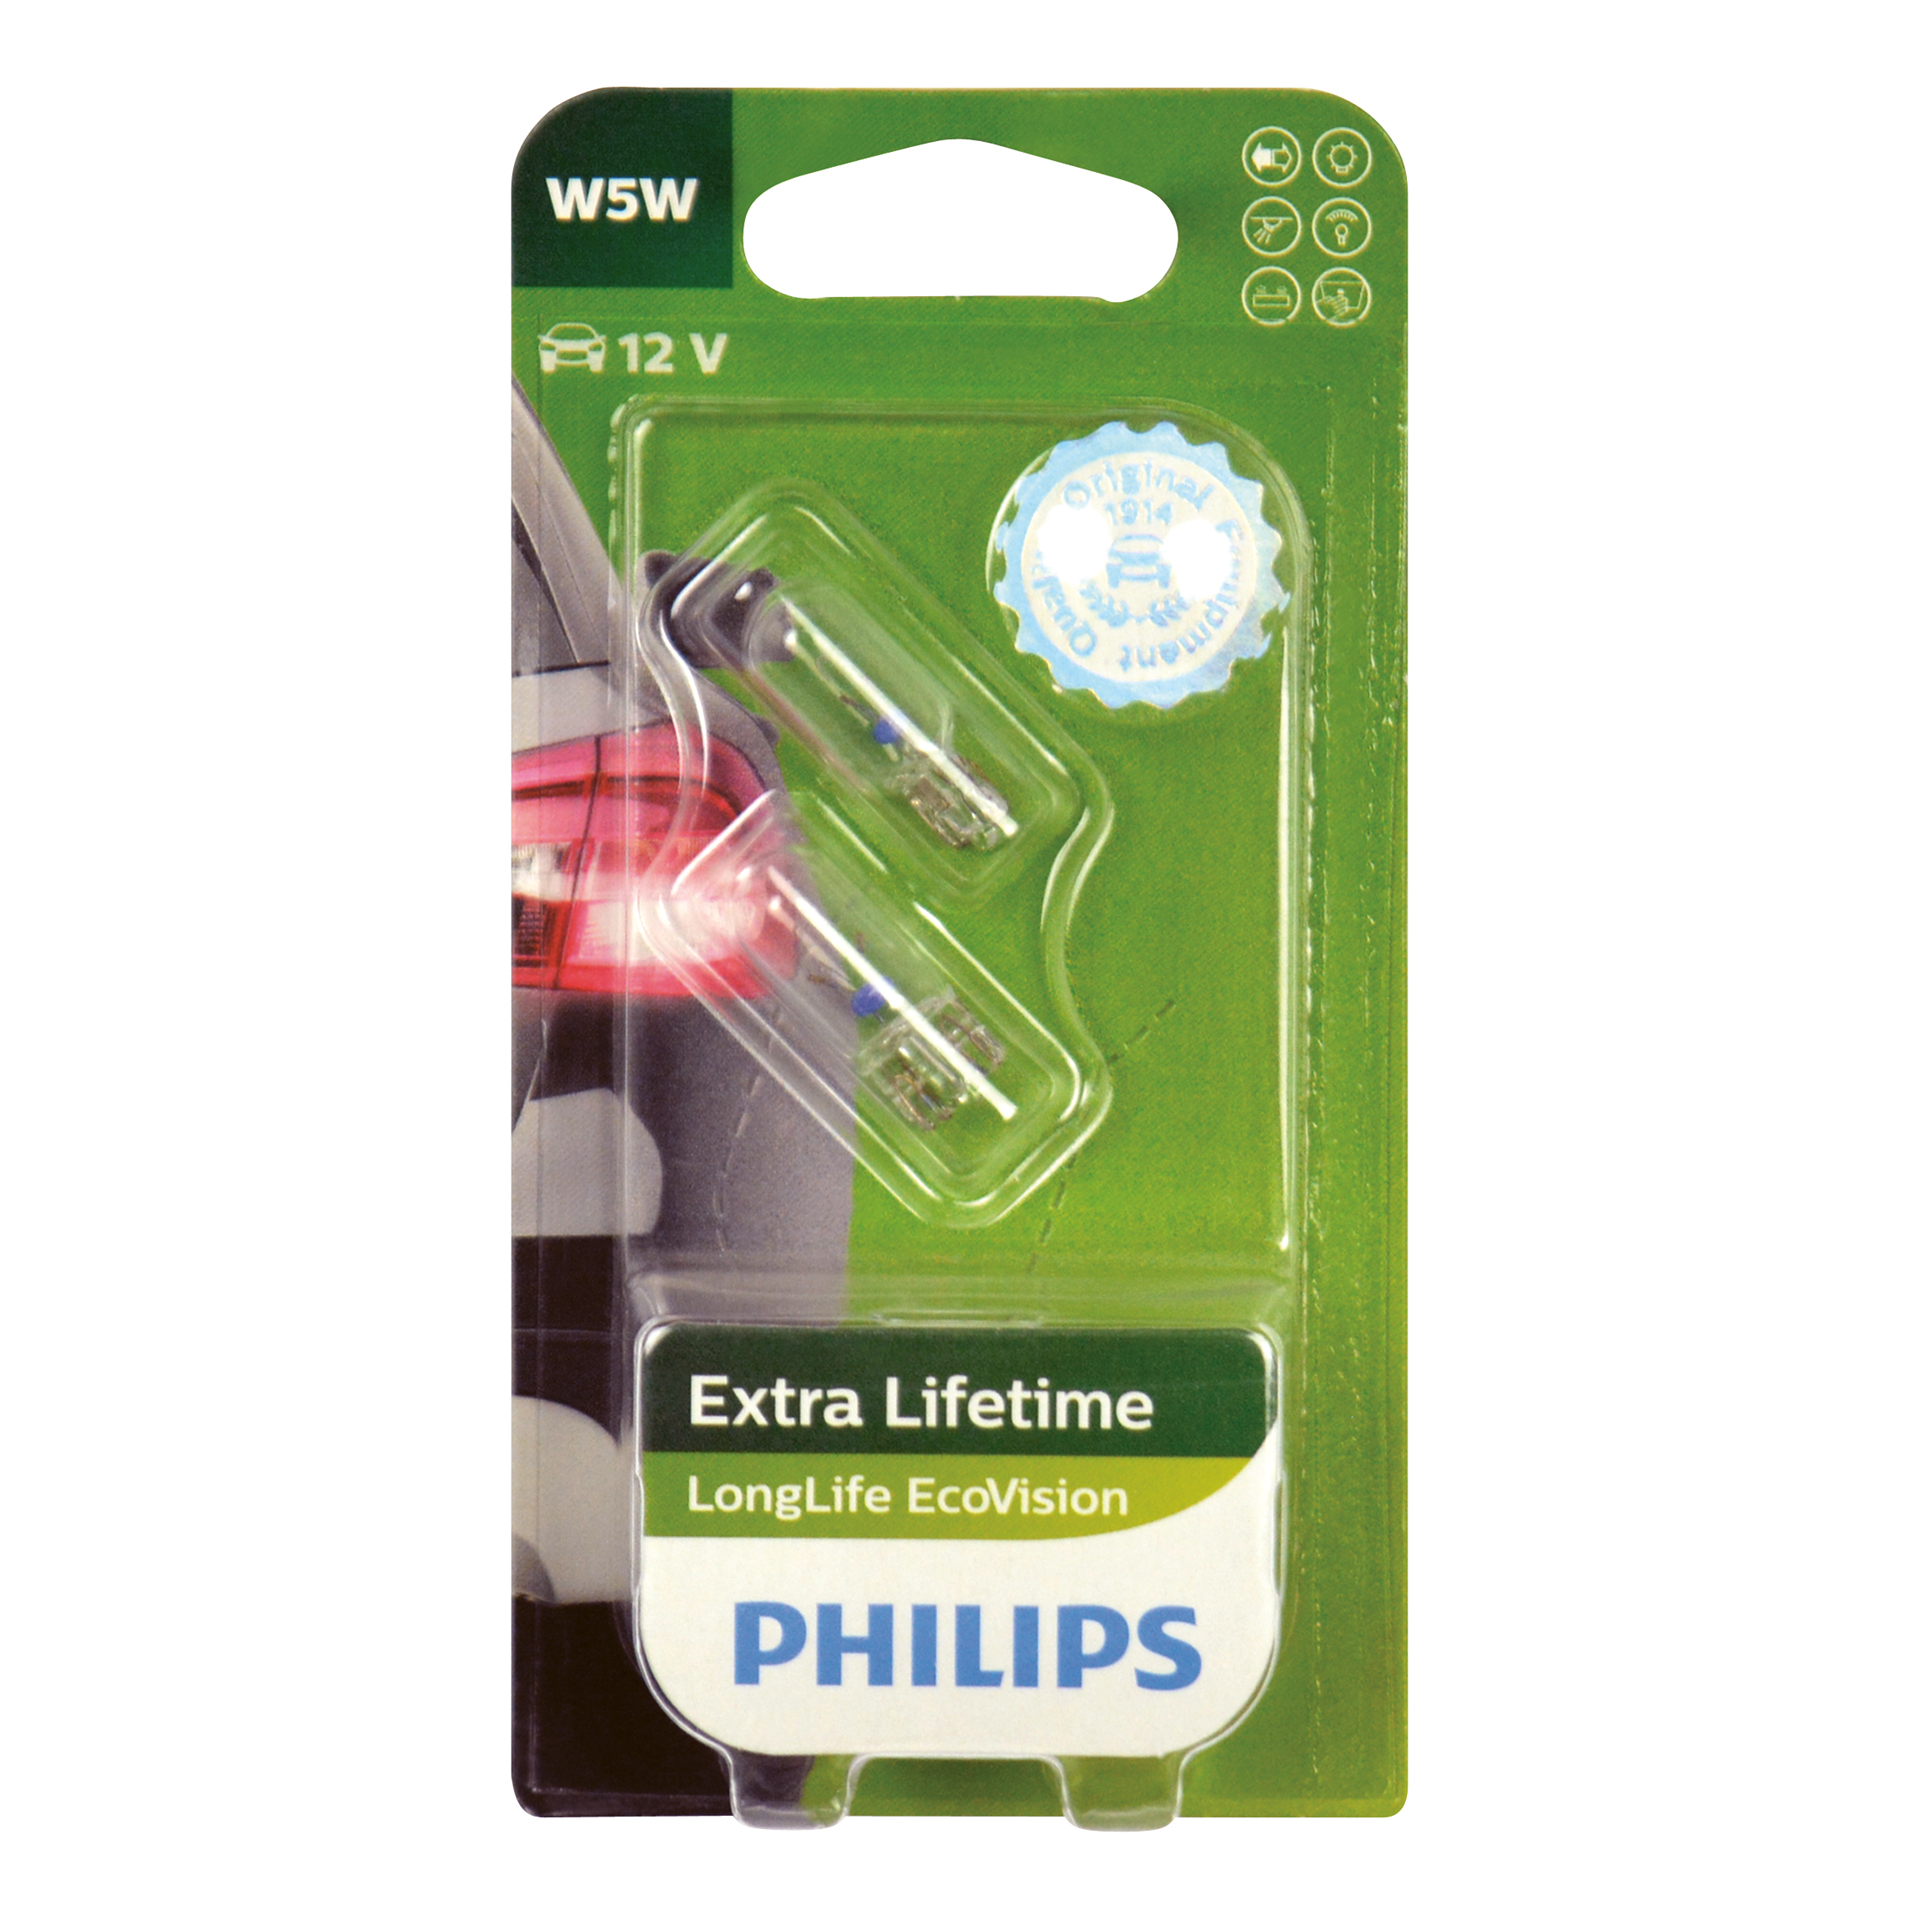 Philips Philips 12961LLECOB2 W5W EcoVision 5W blister 0730519